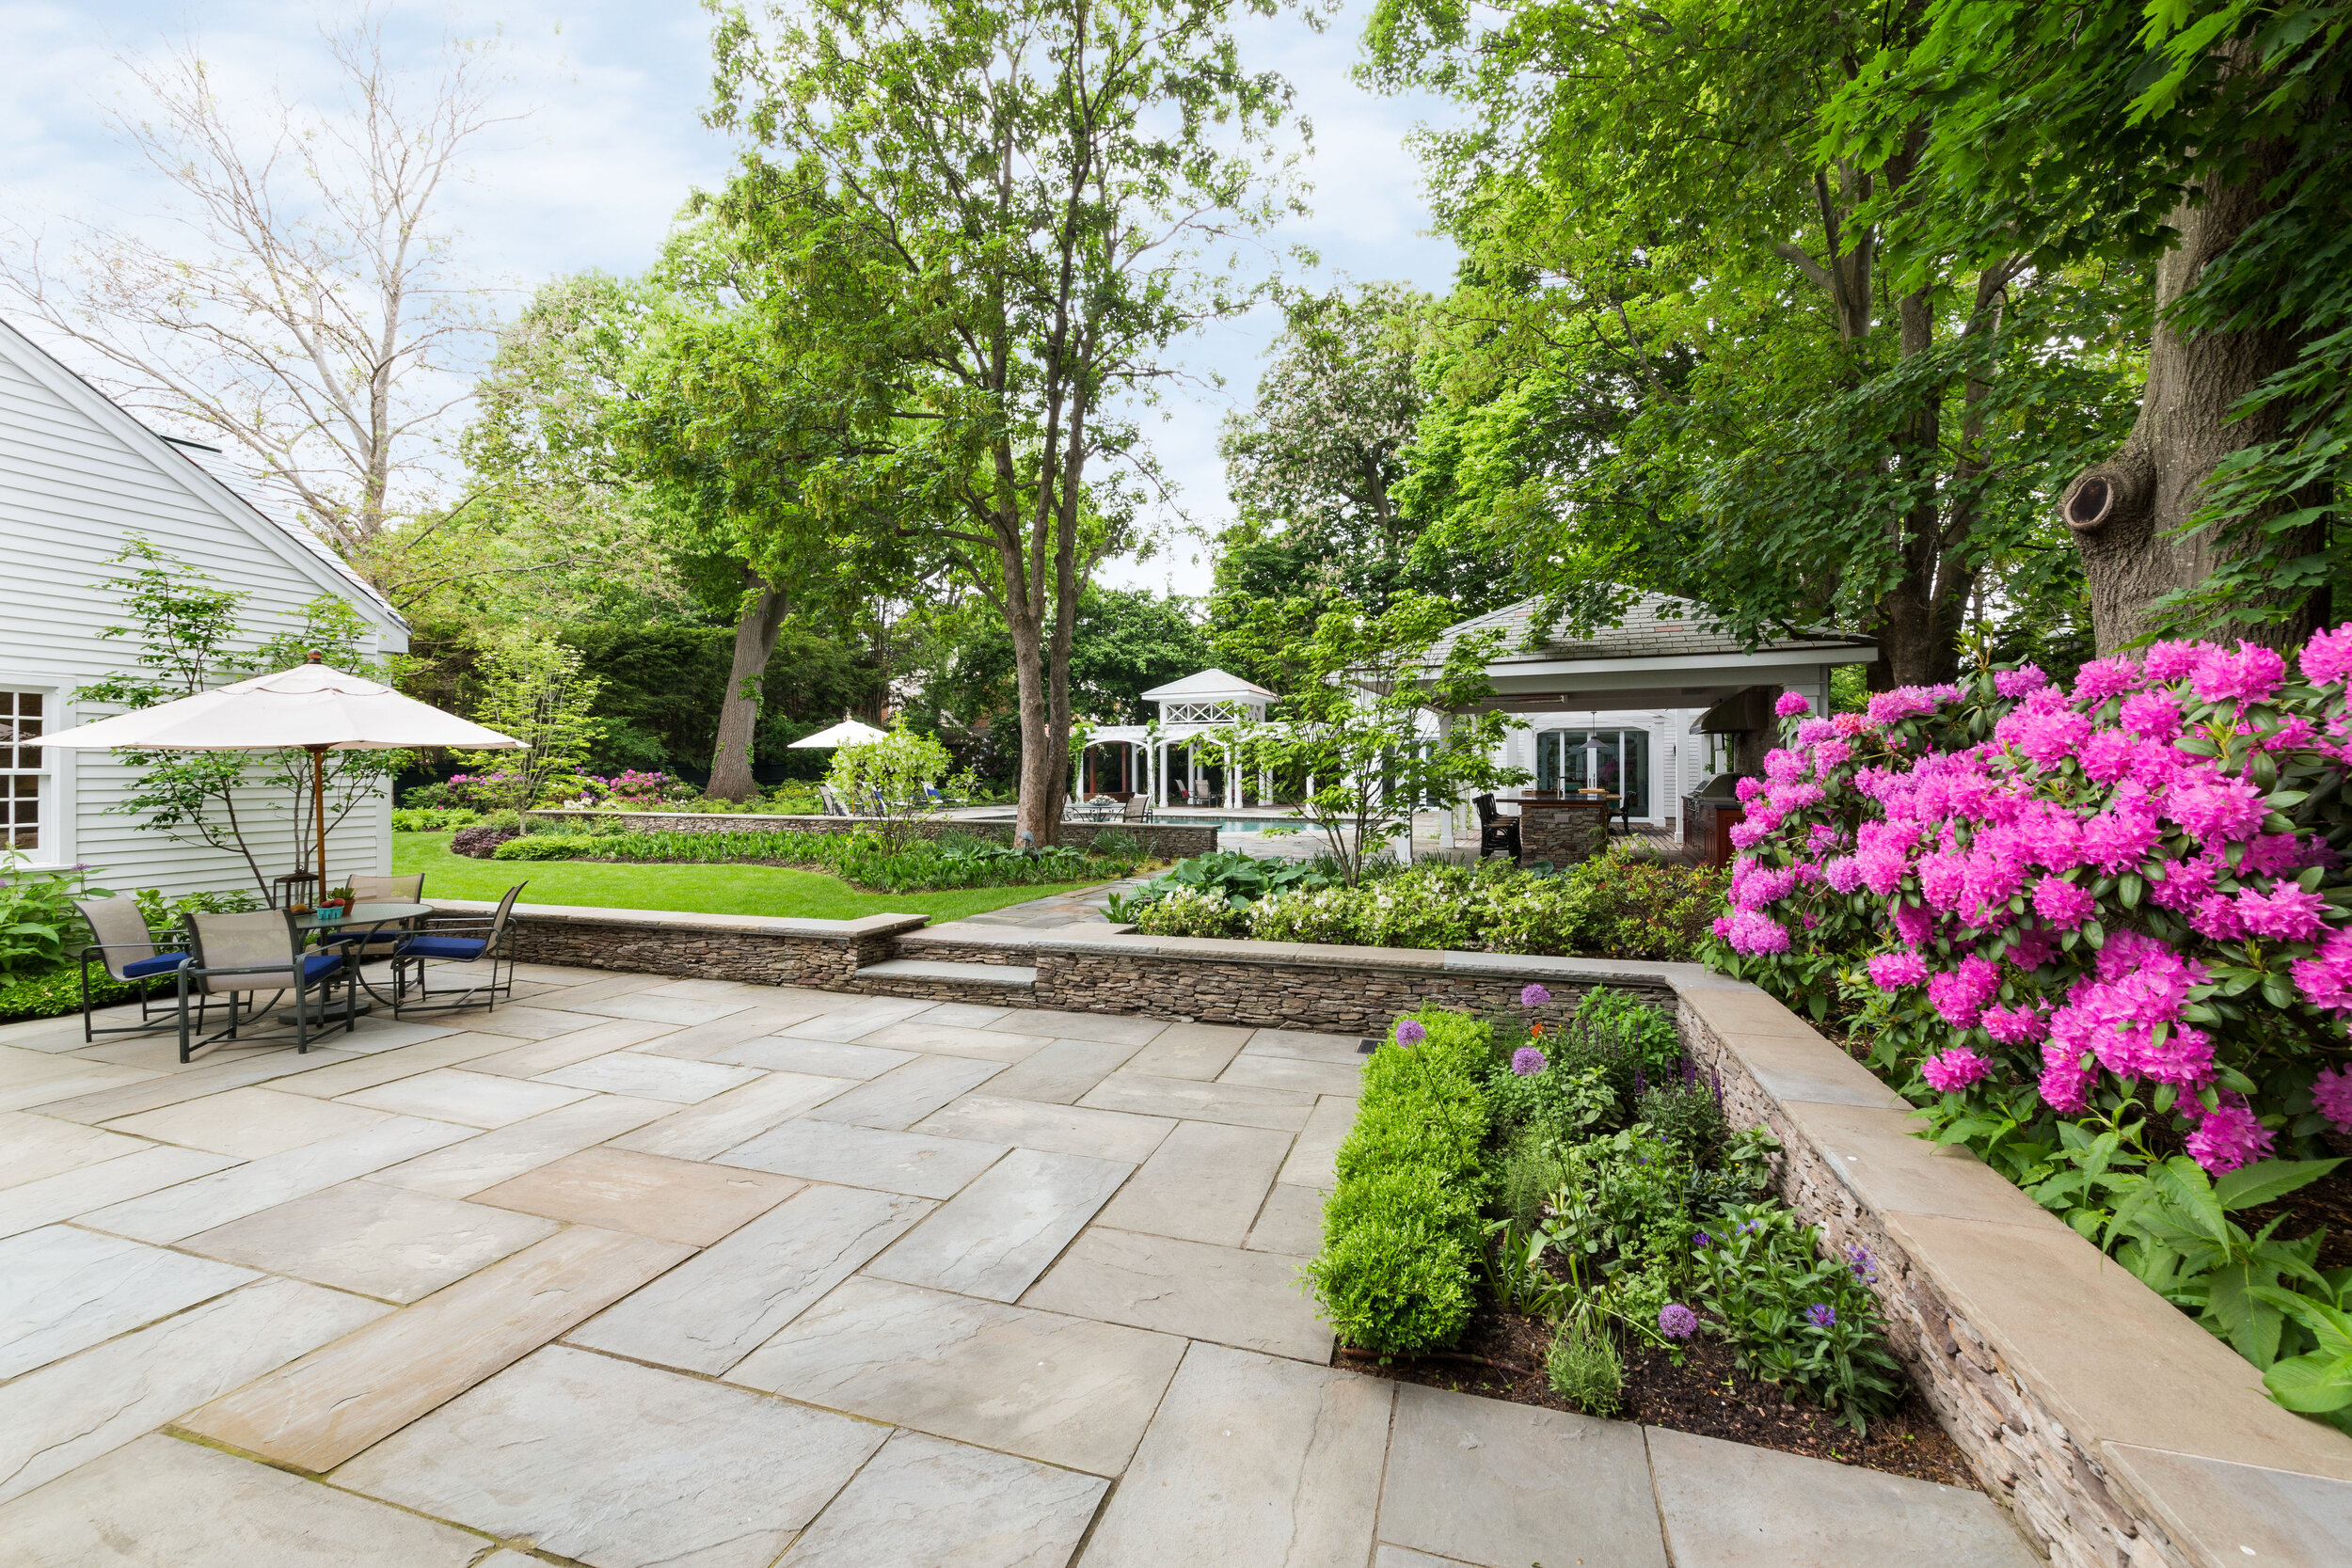 4 Landscape Design Features That Could Best Complement a Bluestone Patio in  Wellesley, MA Area